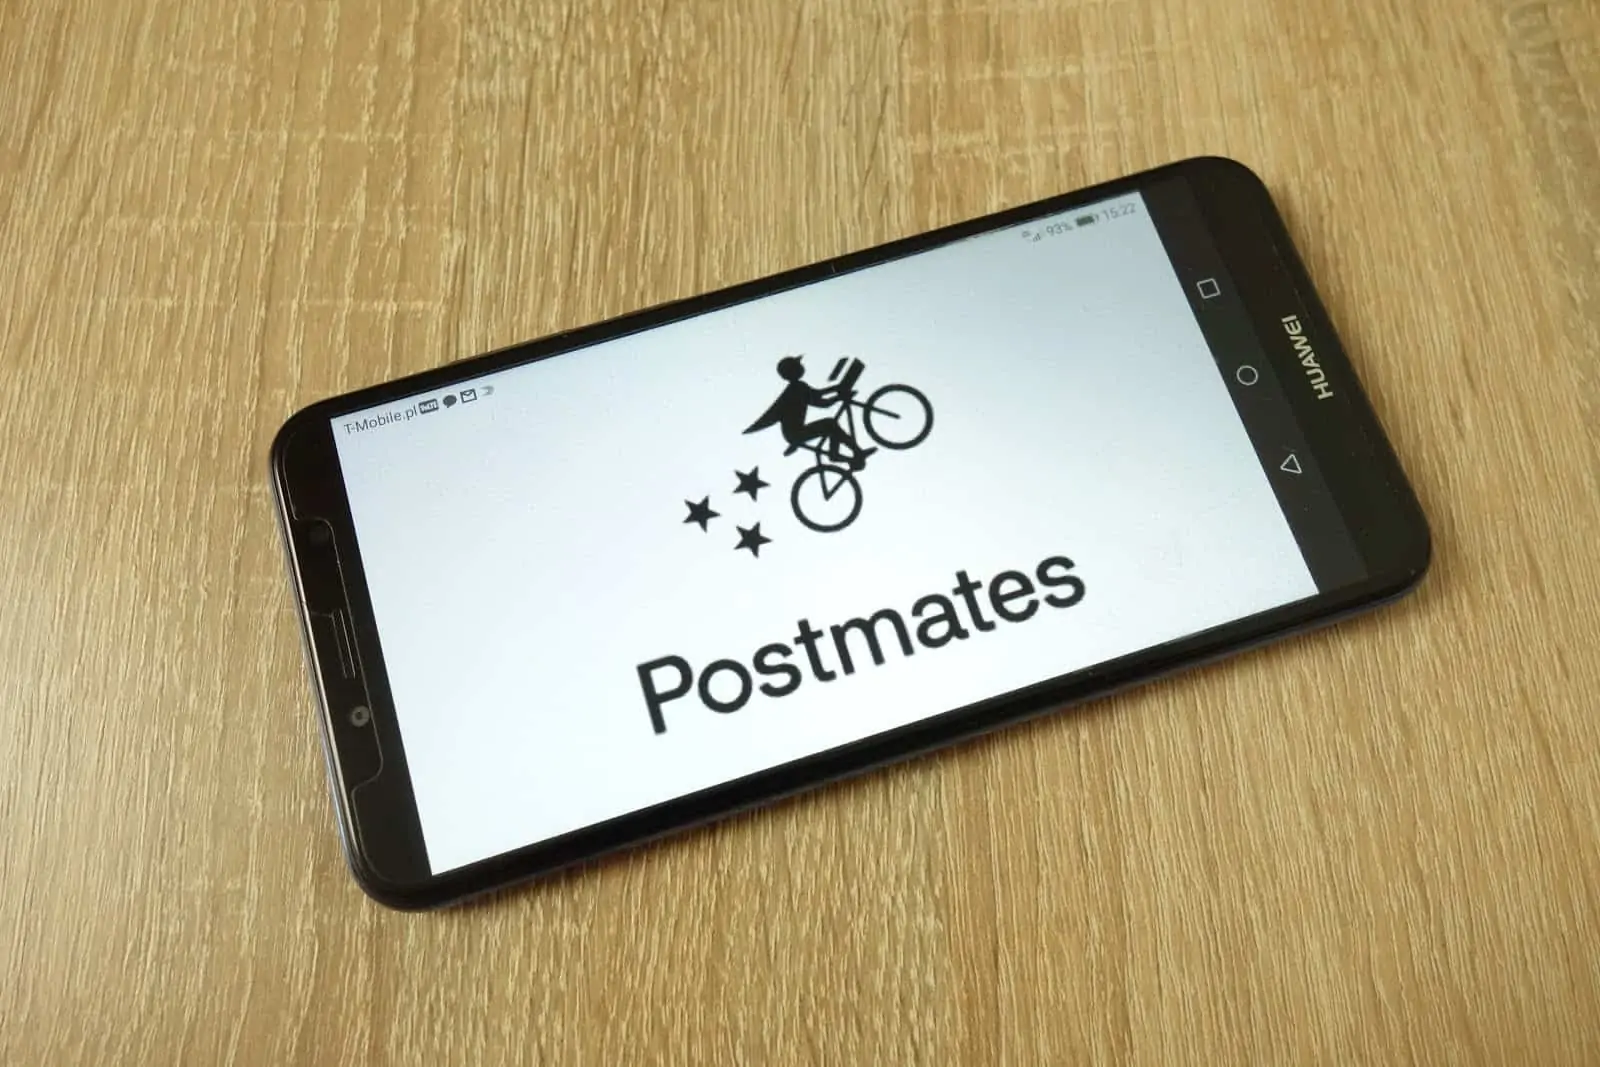 Drive for Postmates: The Postmates logo on a smartphone